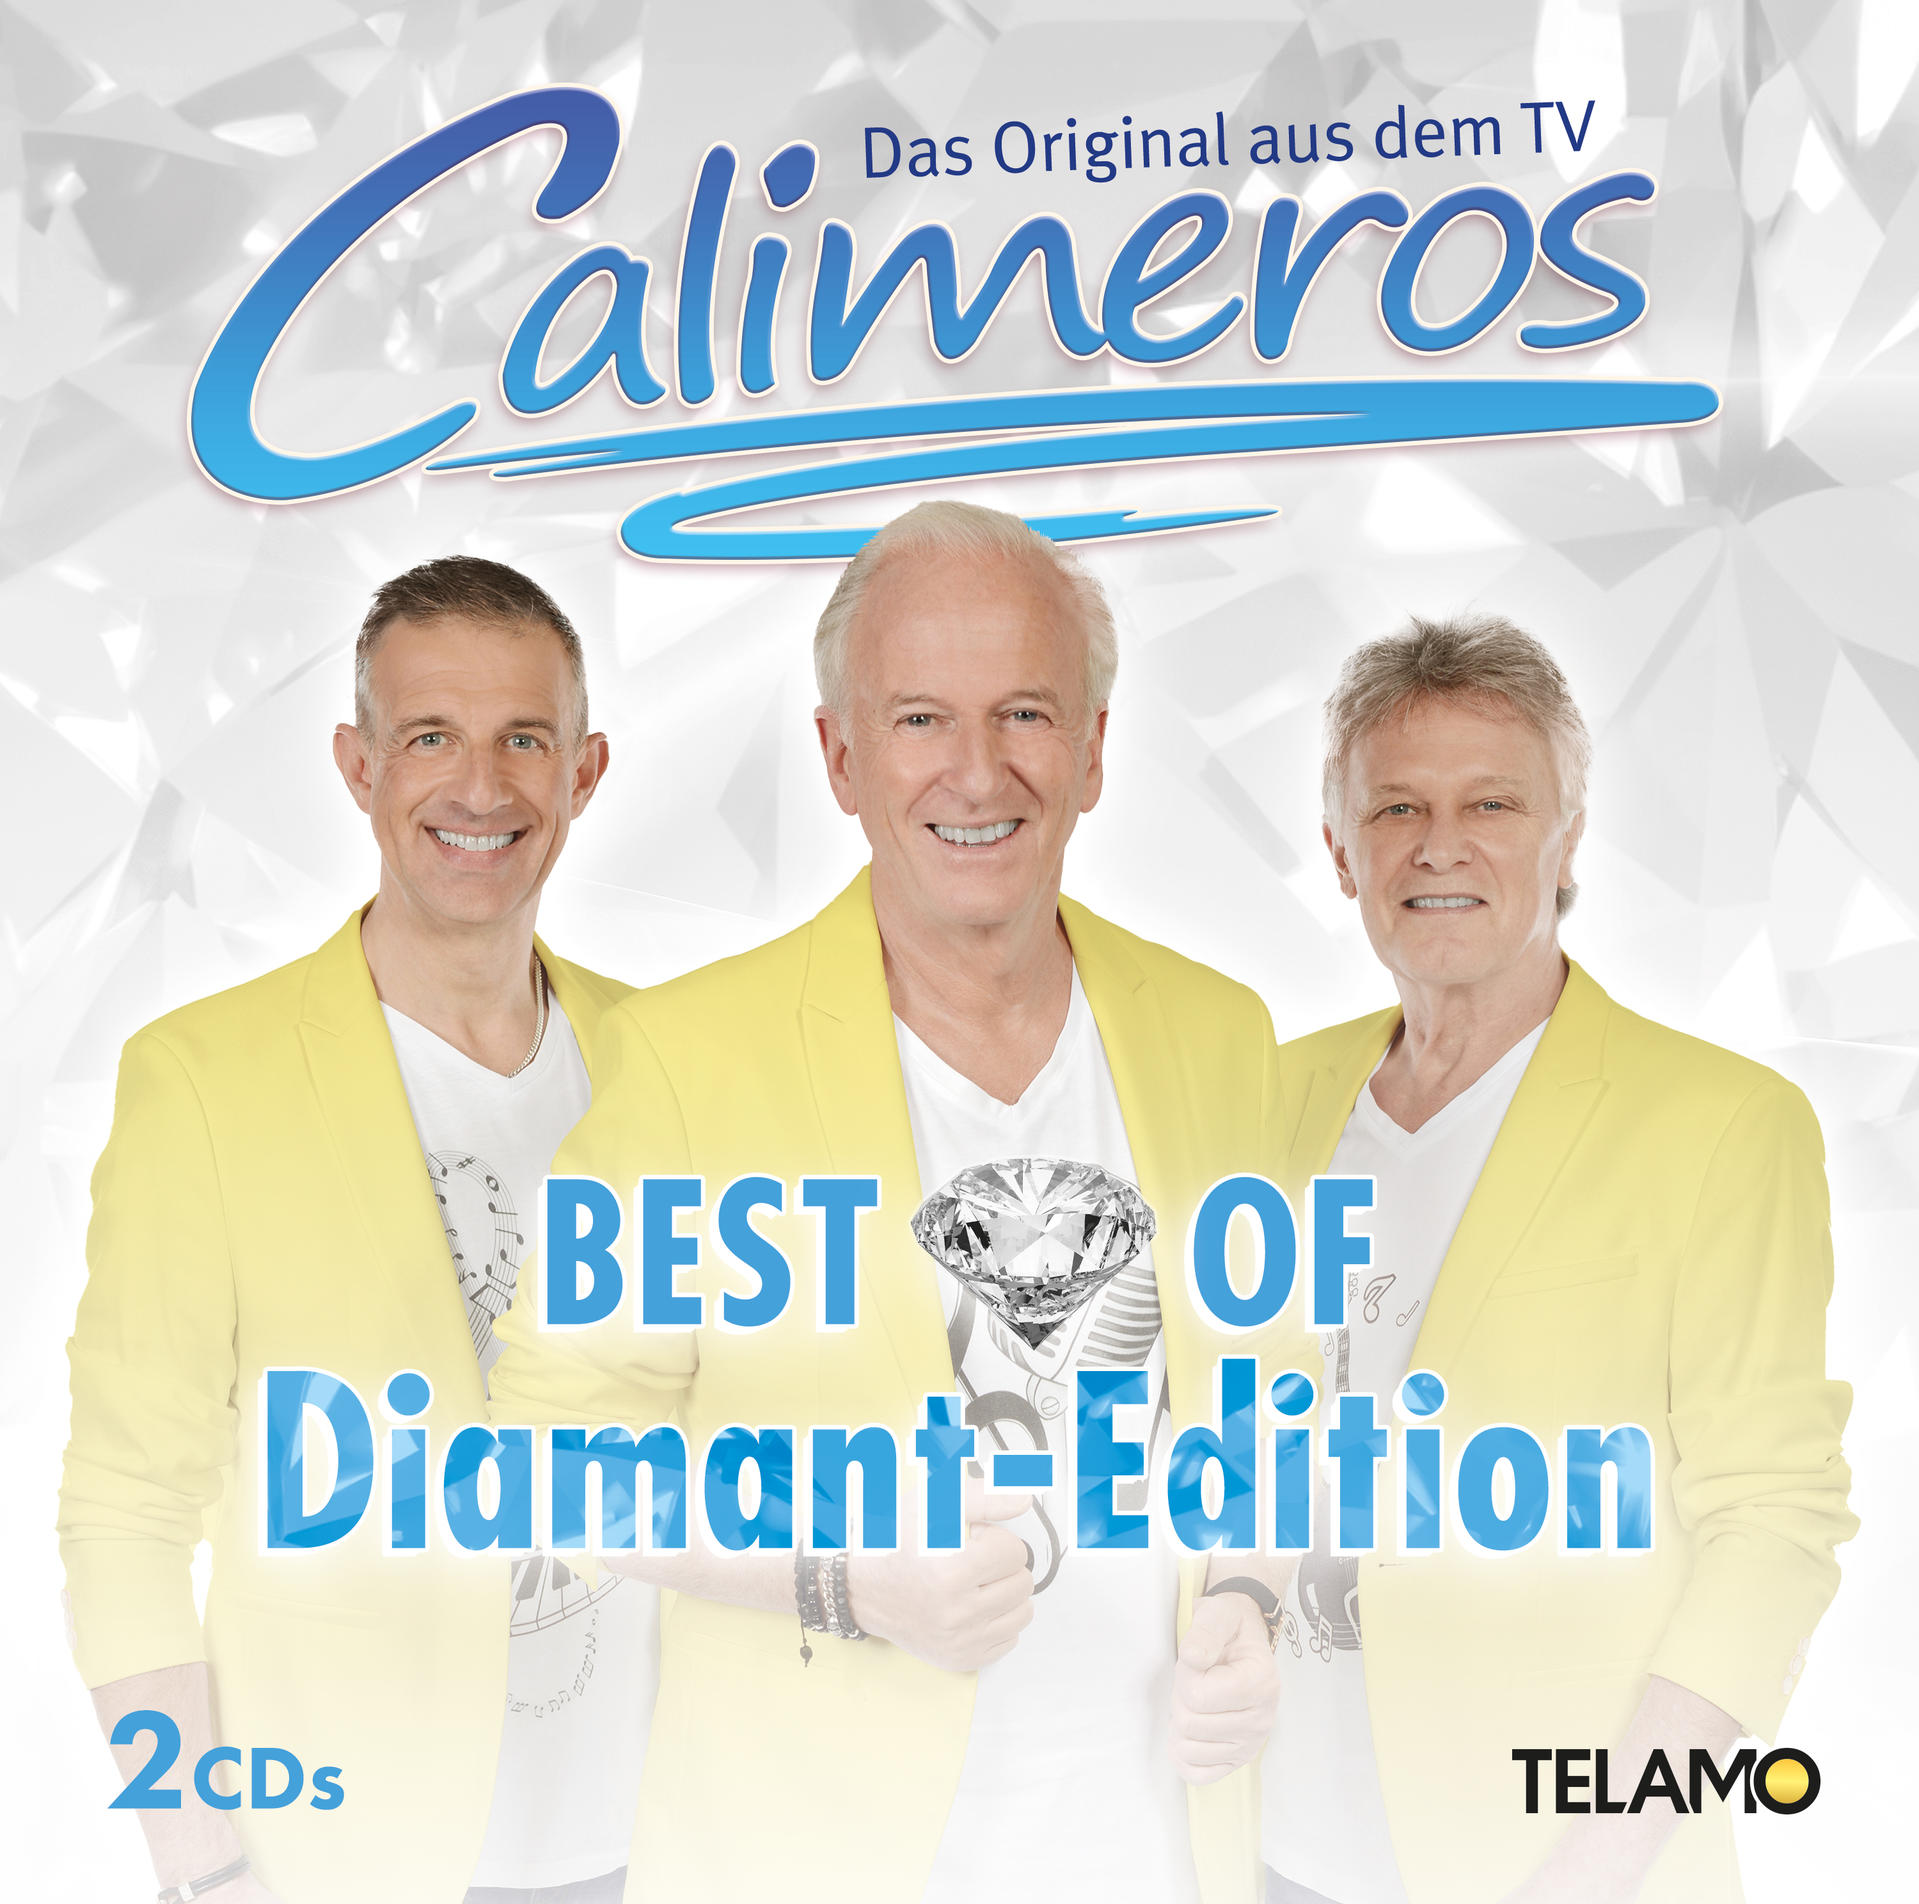 Best - (CD) Of(Diamant-Edition) - Calimeros